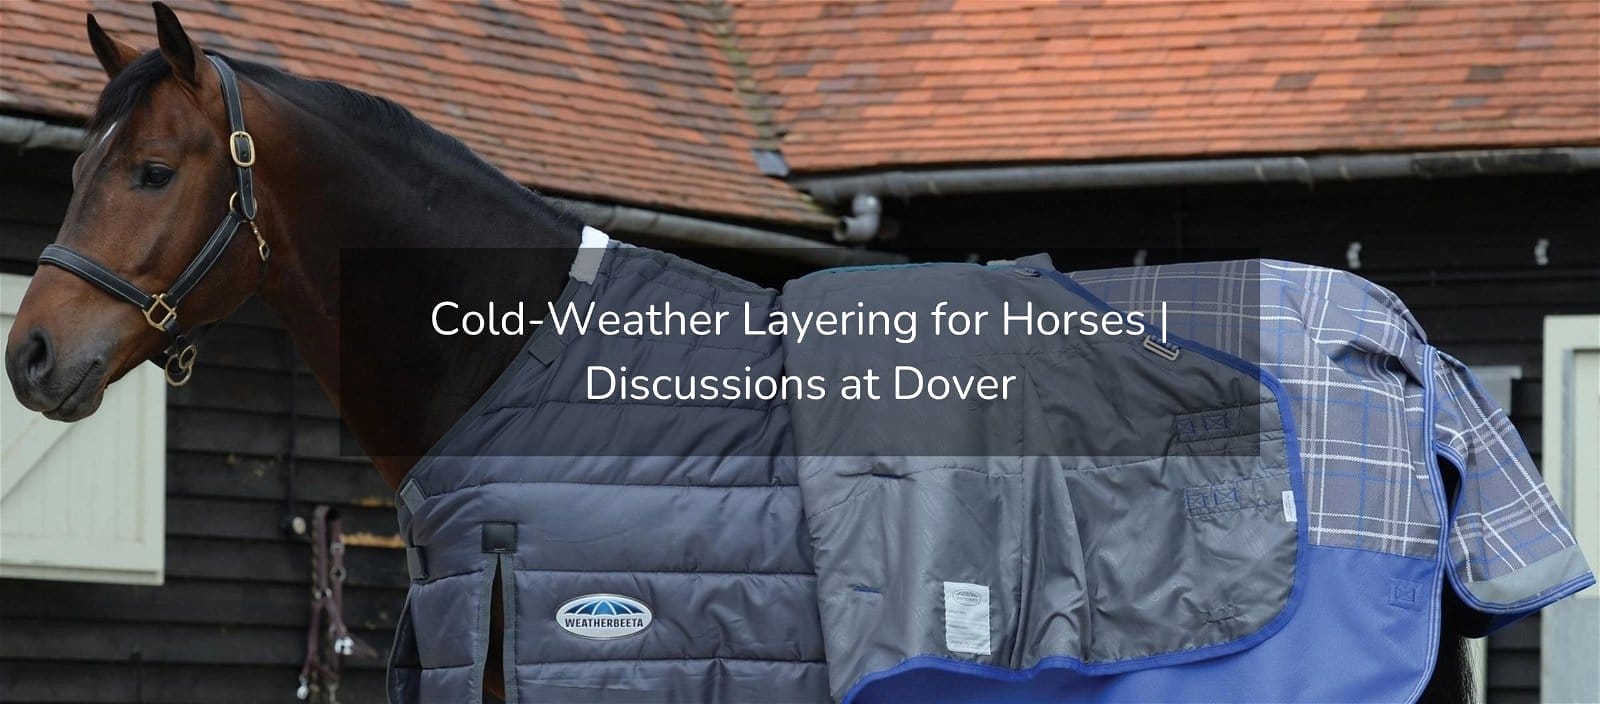 New Blog Post: "Cold-Weather Layering for Horses"